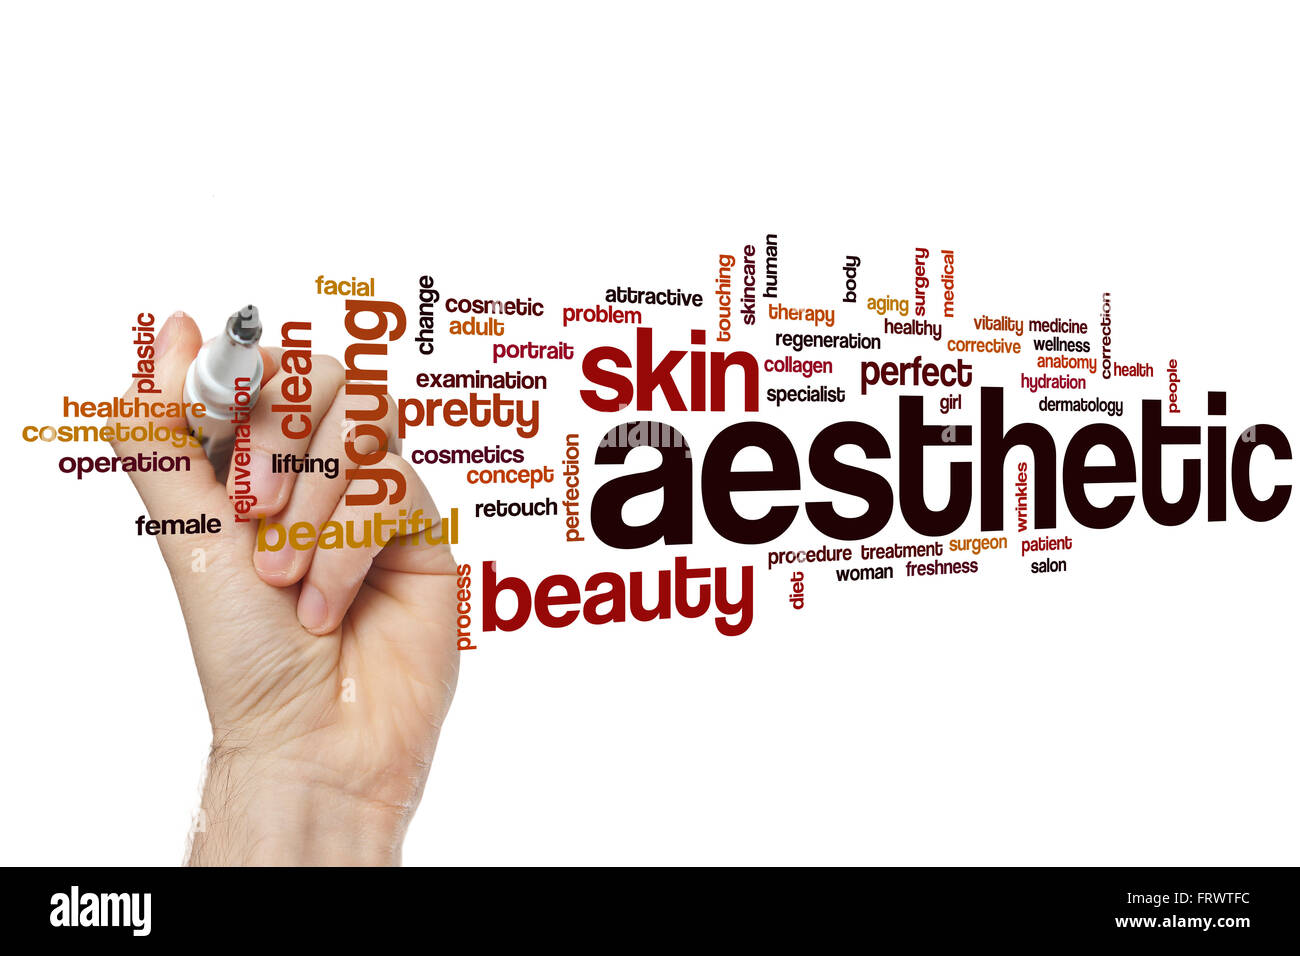 Aesthetic word cloud concept Stock Photo